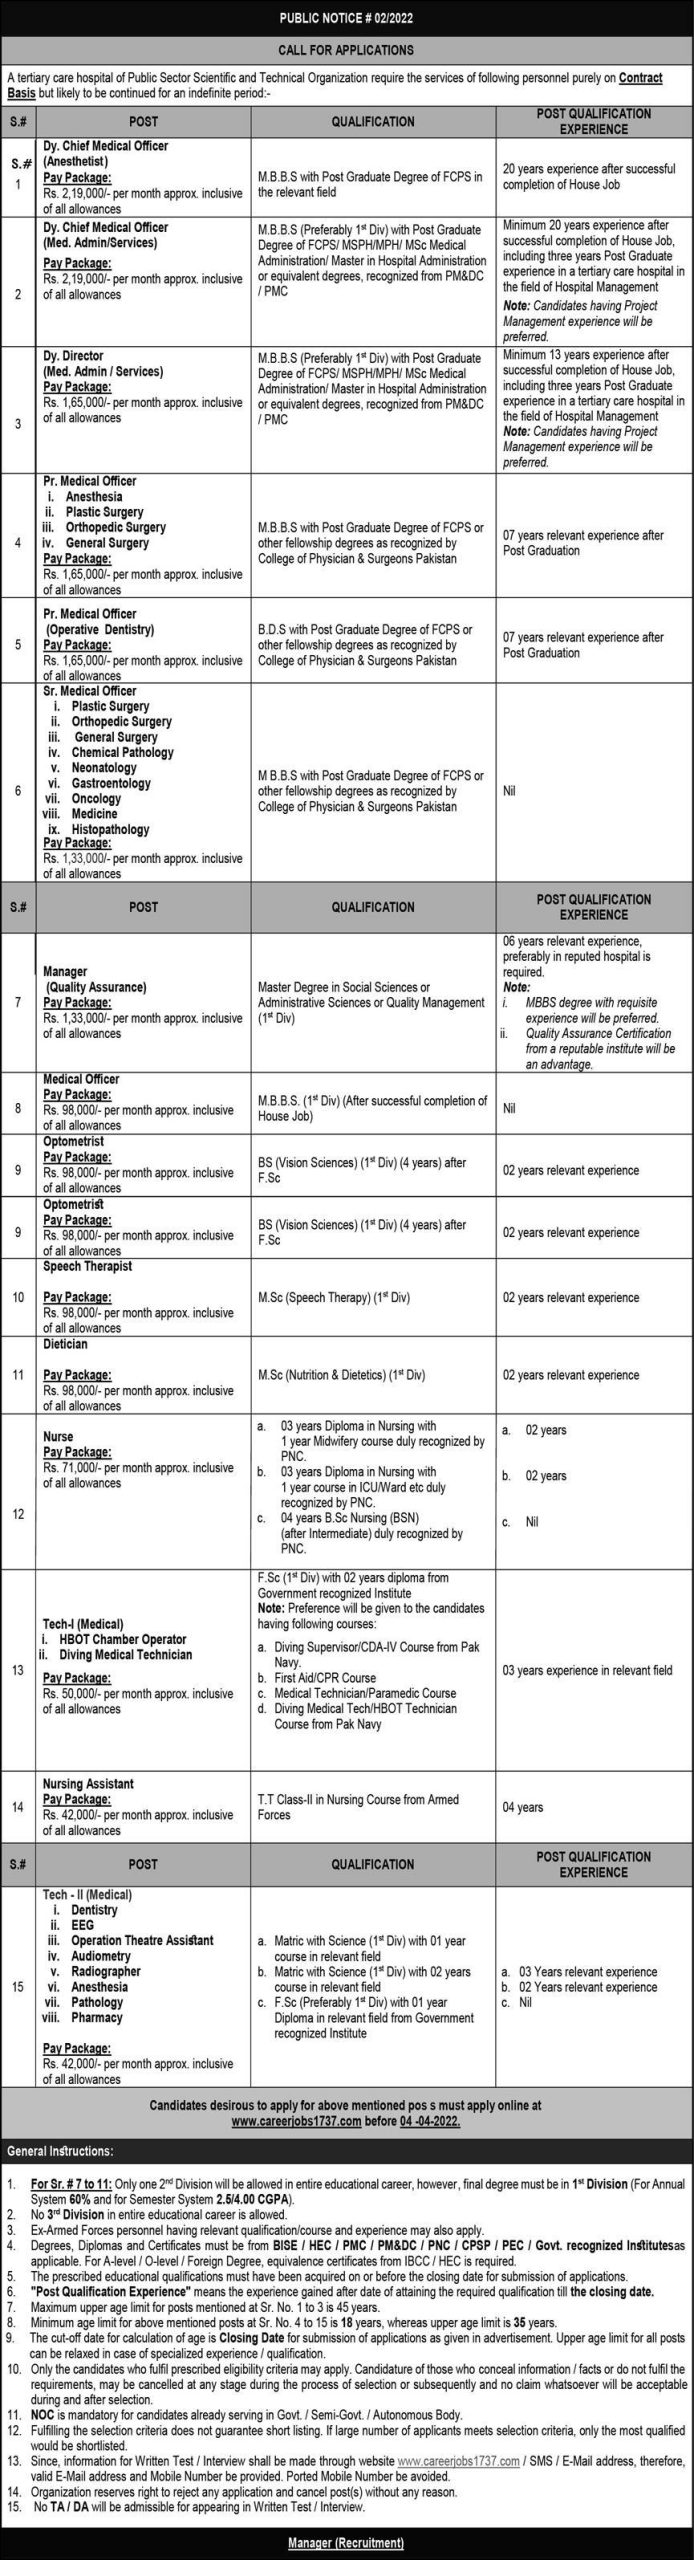 Public Sector Scientific and Technological Organization Jobs 2022